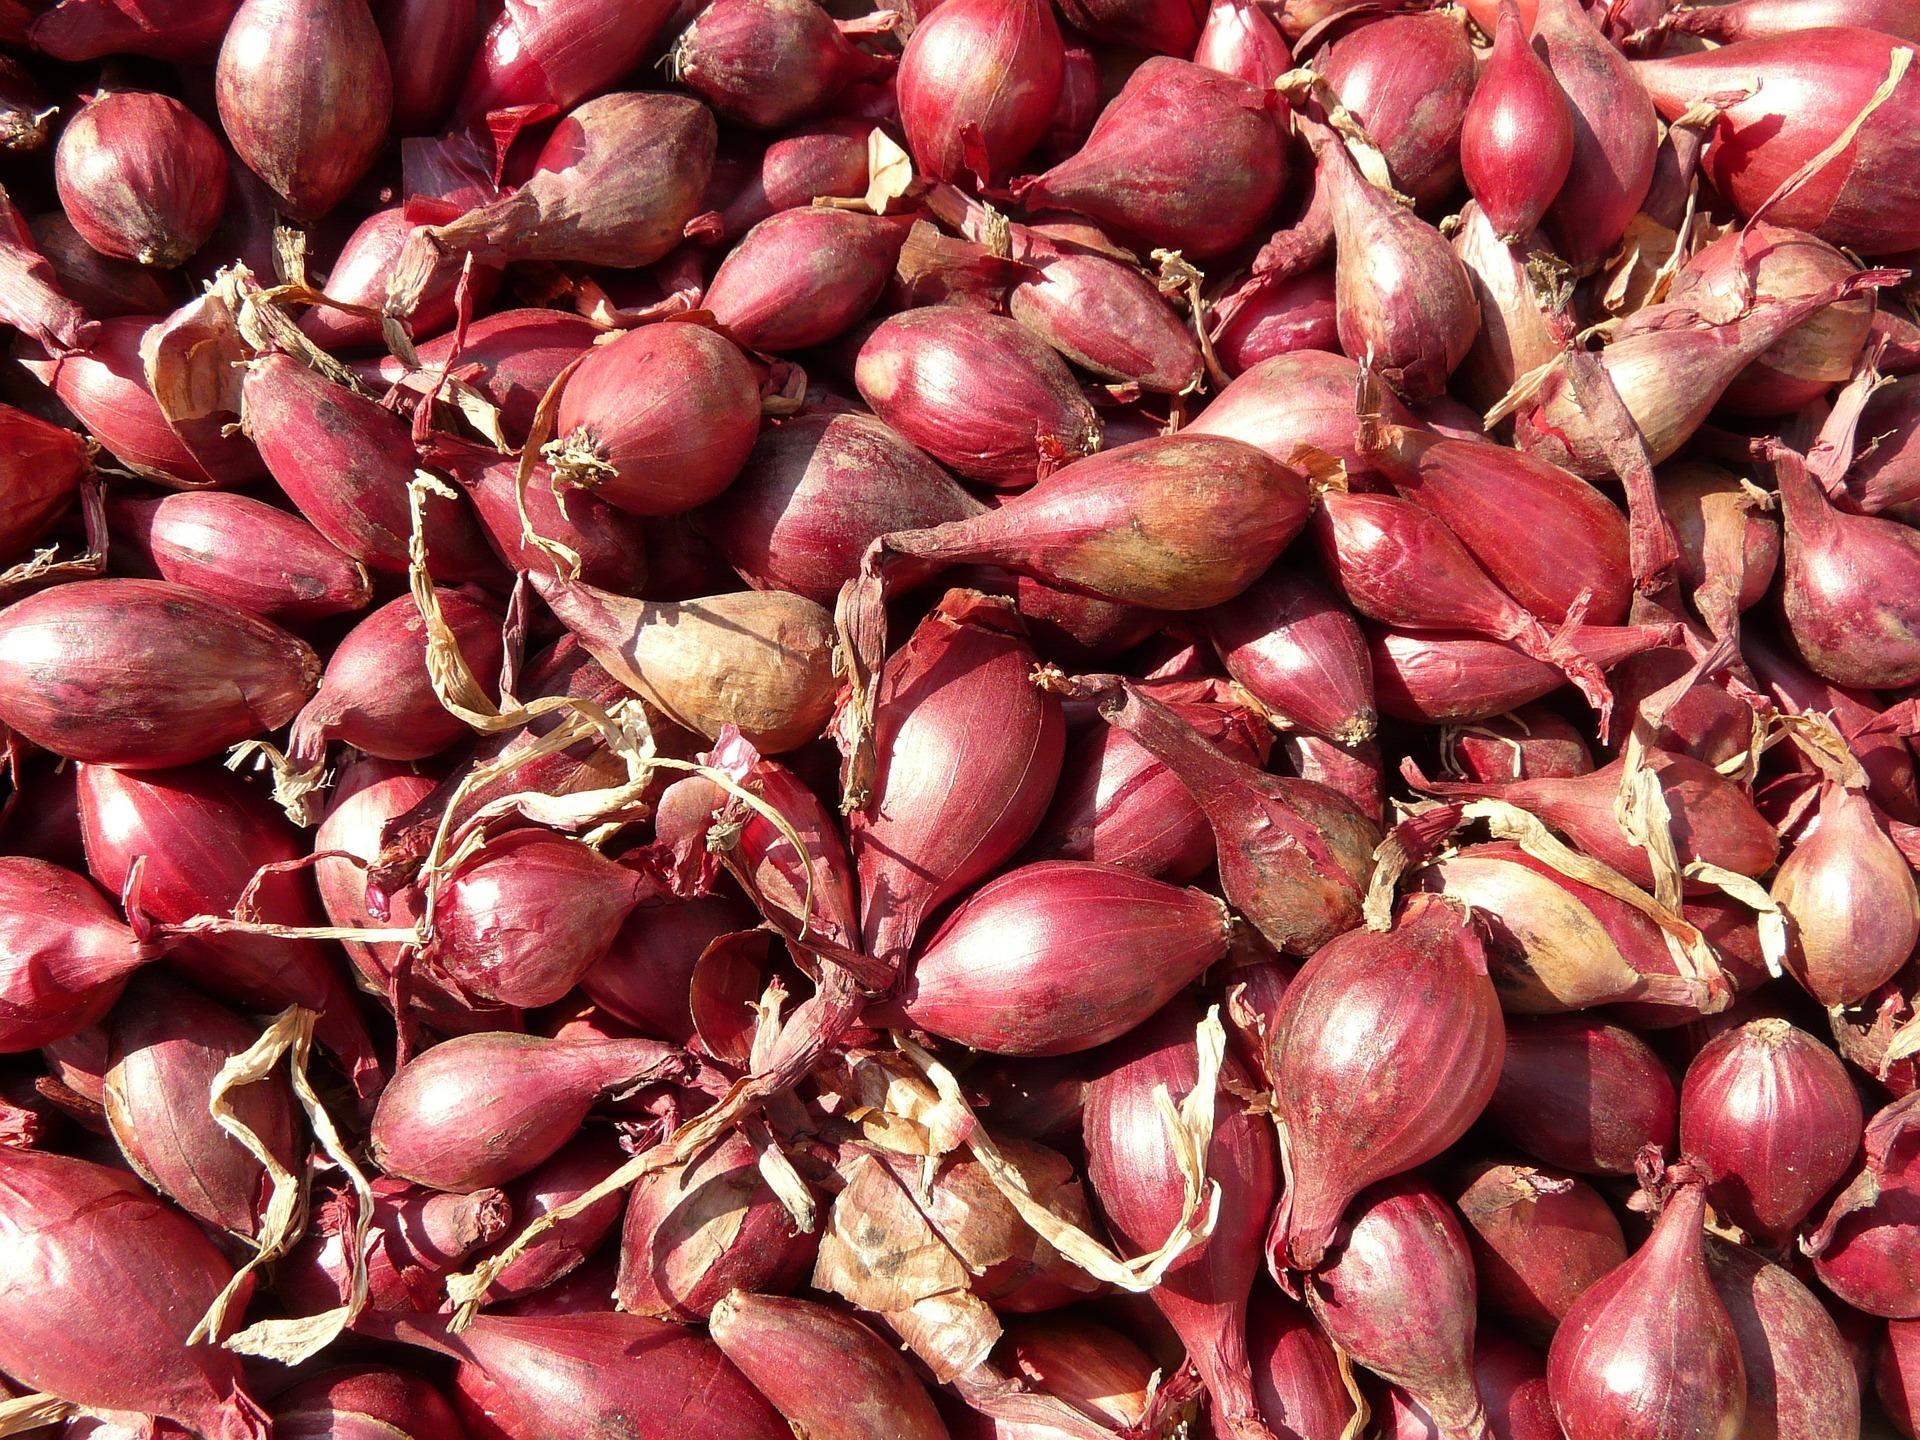 uploads/images/Red Shallots 5768_1920